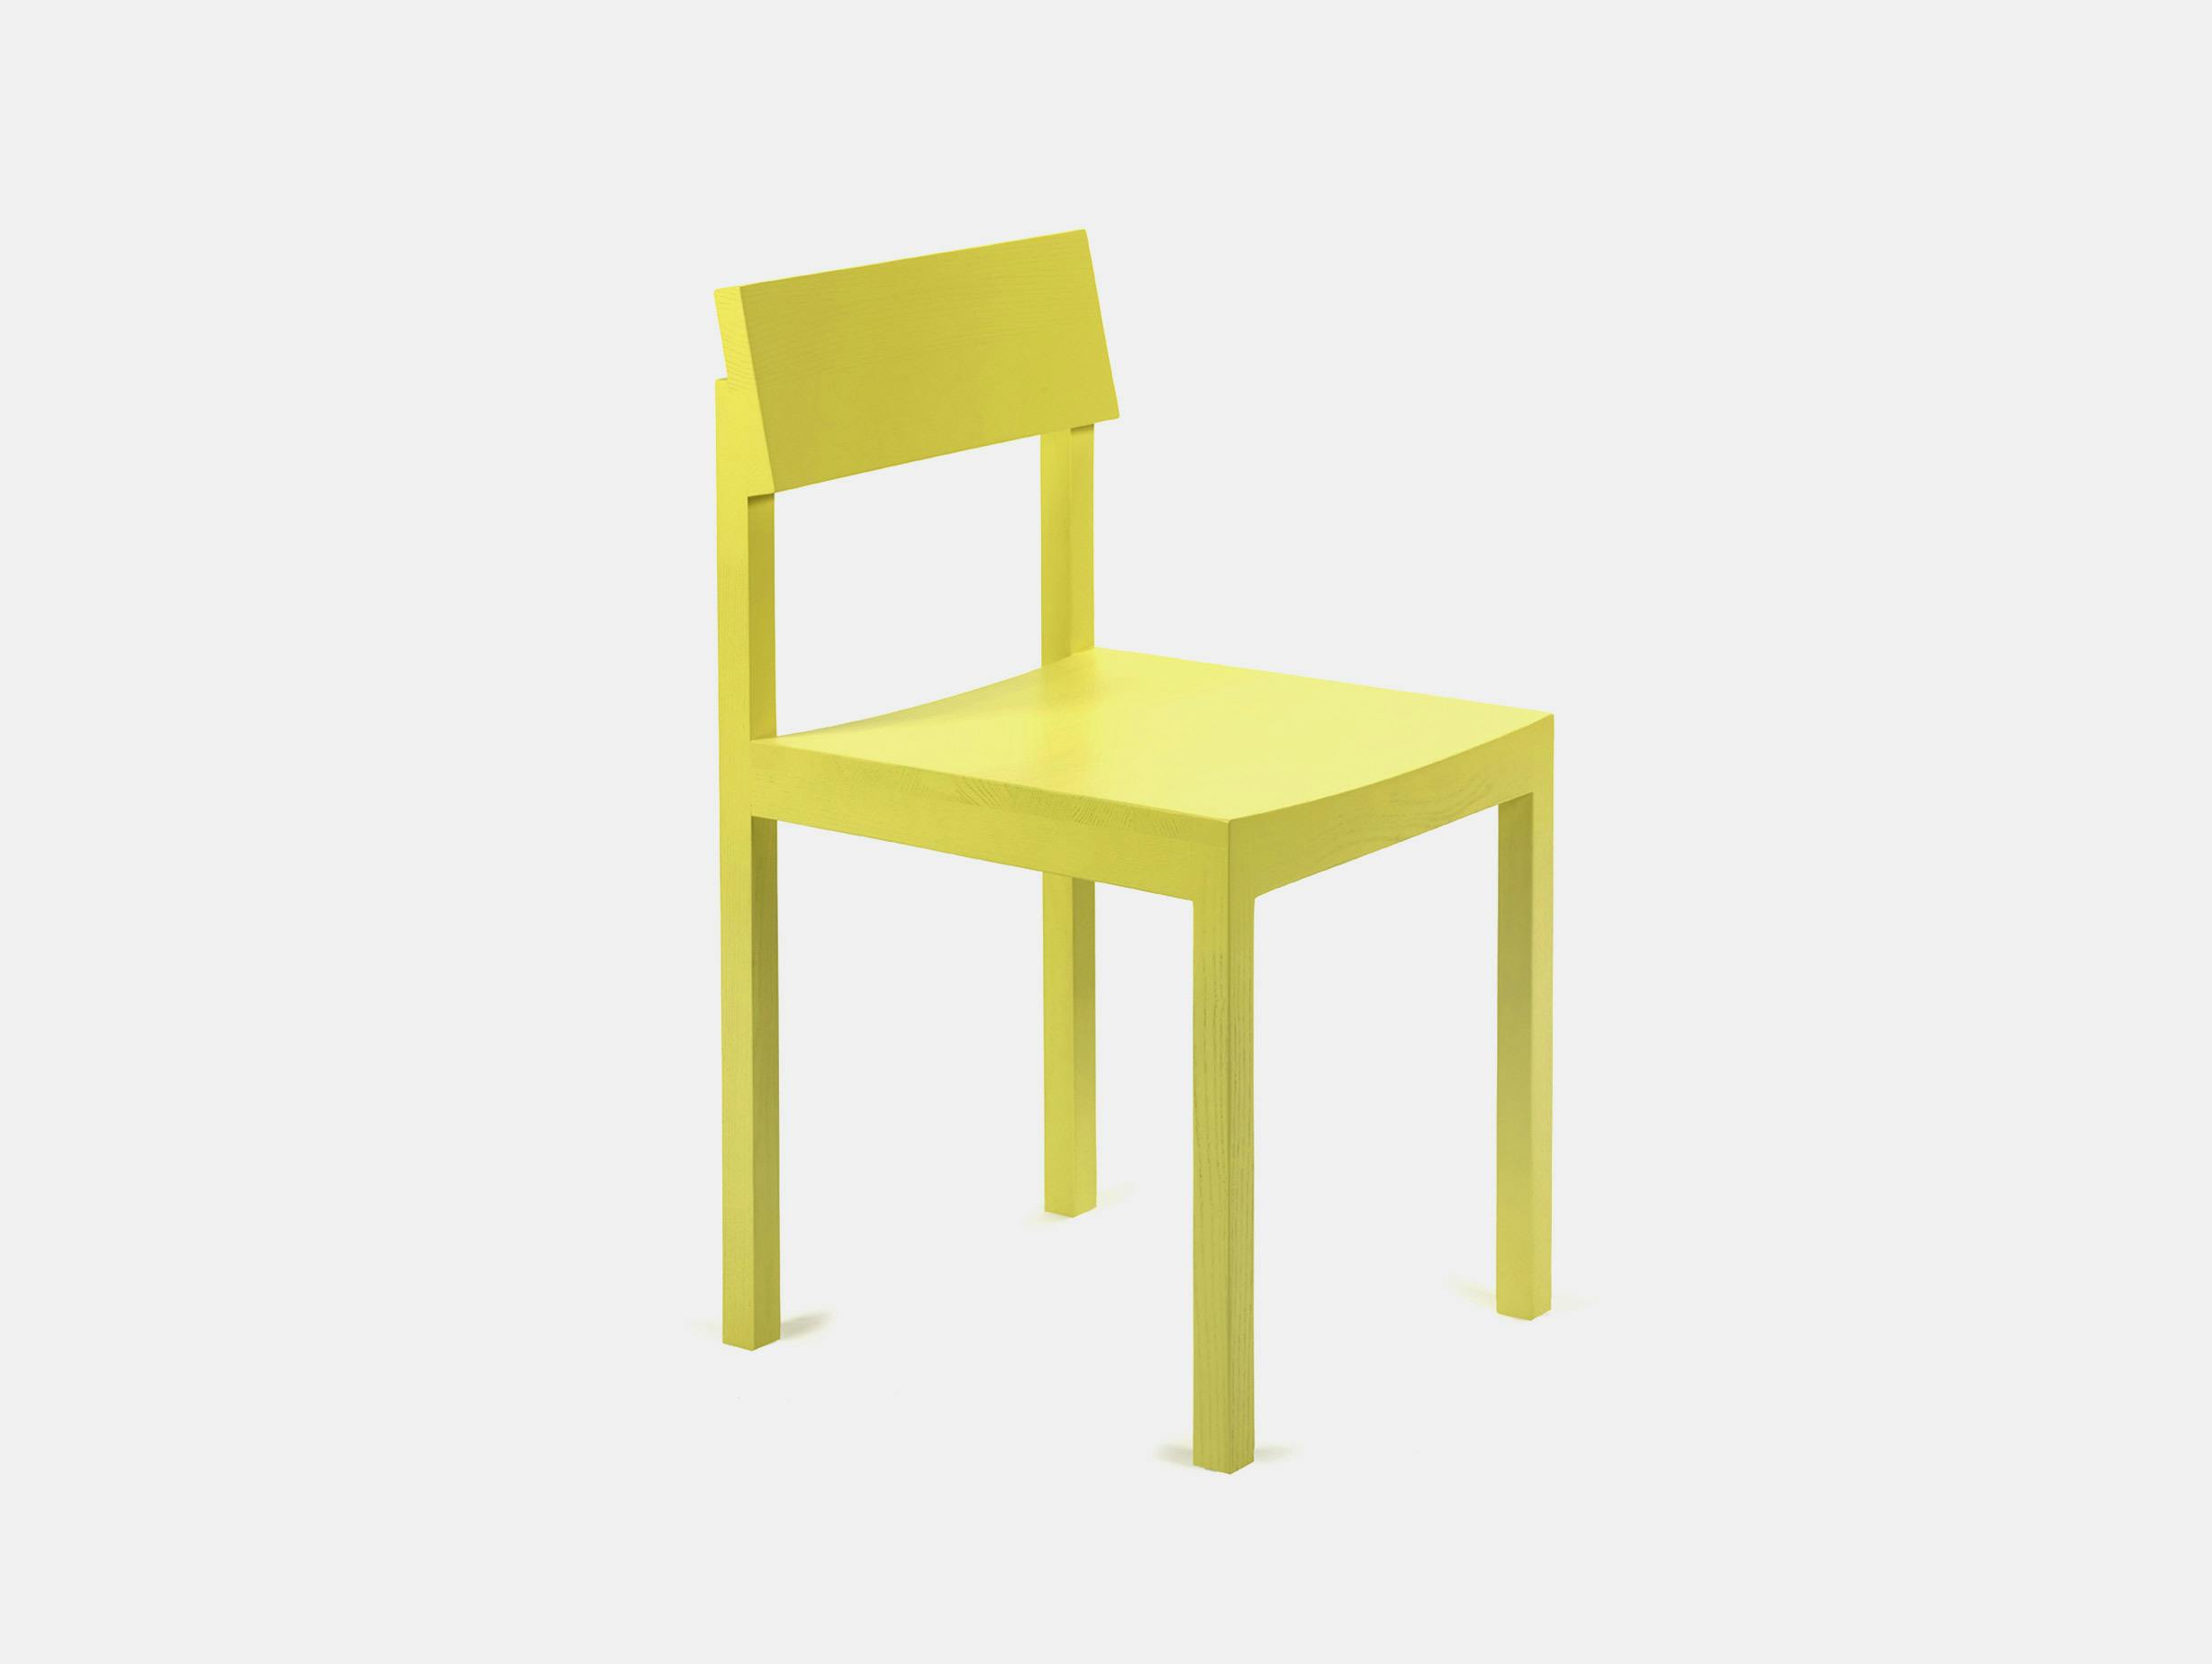 Valerie object big game silent chair sunshine yellow